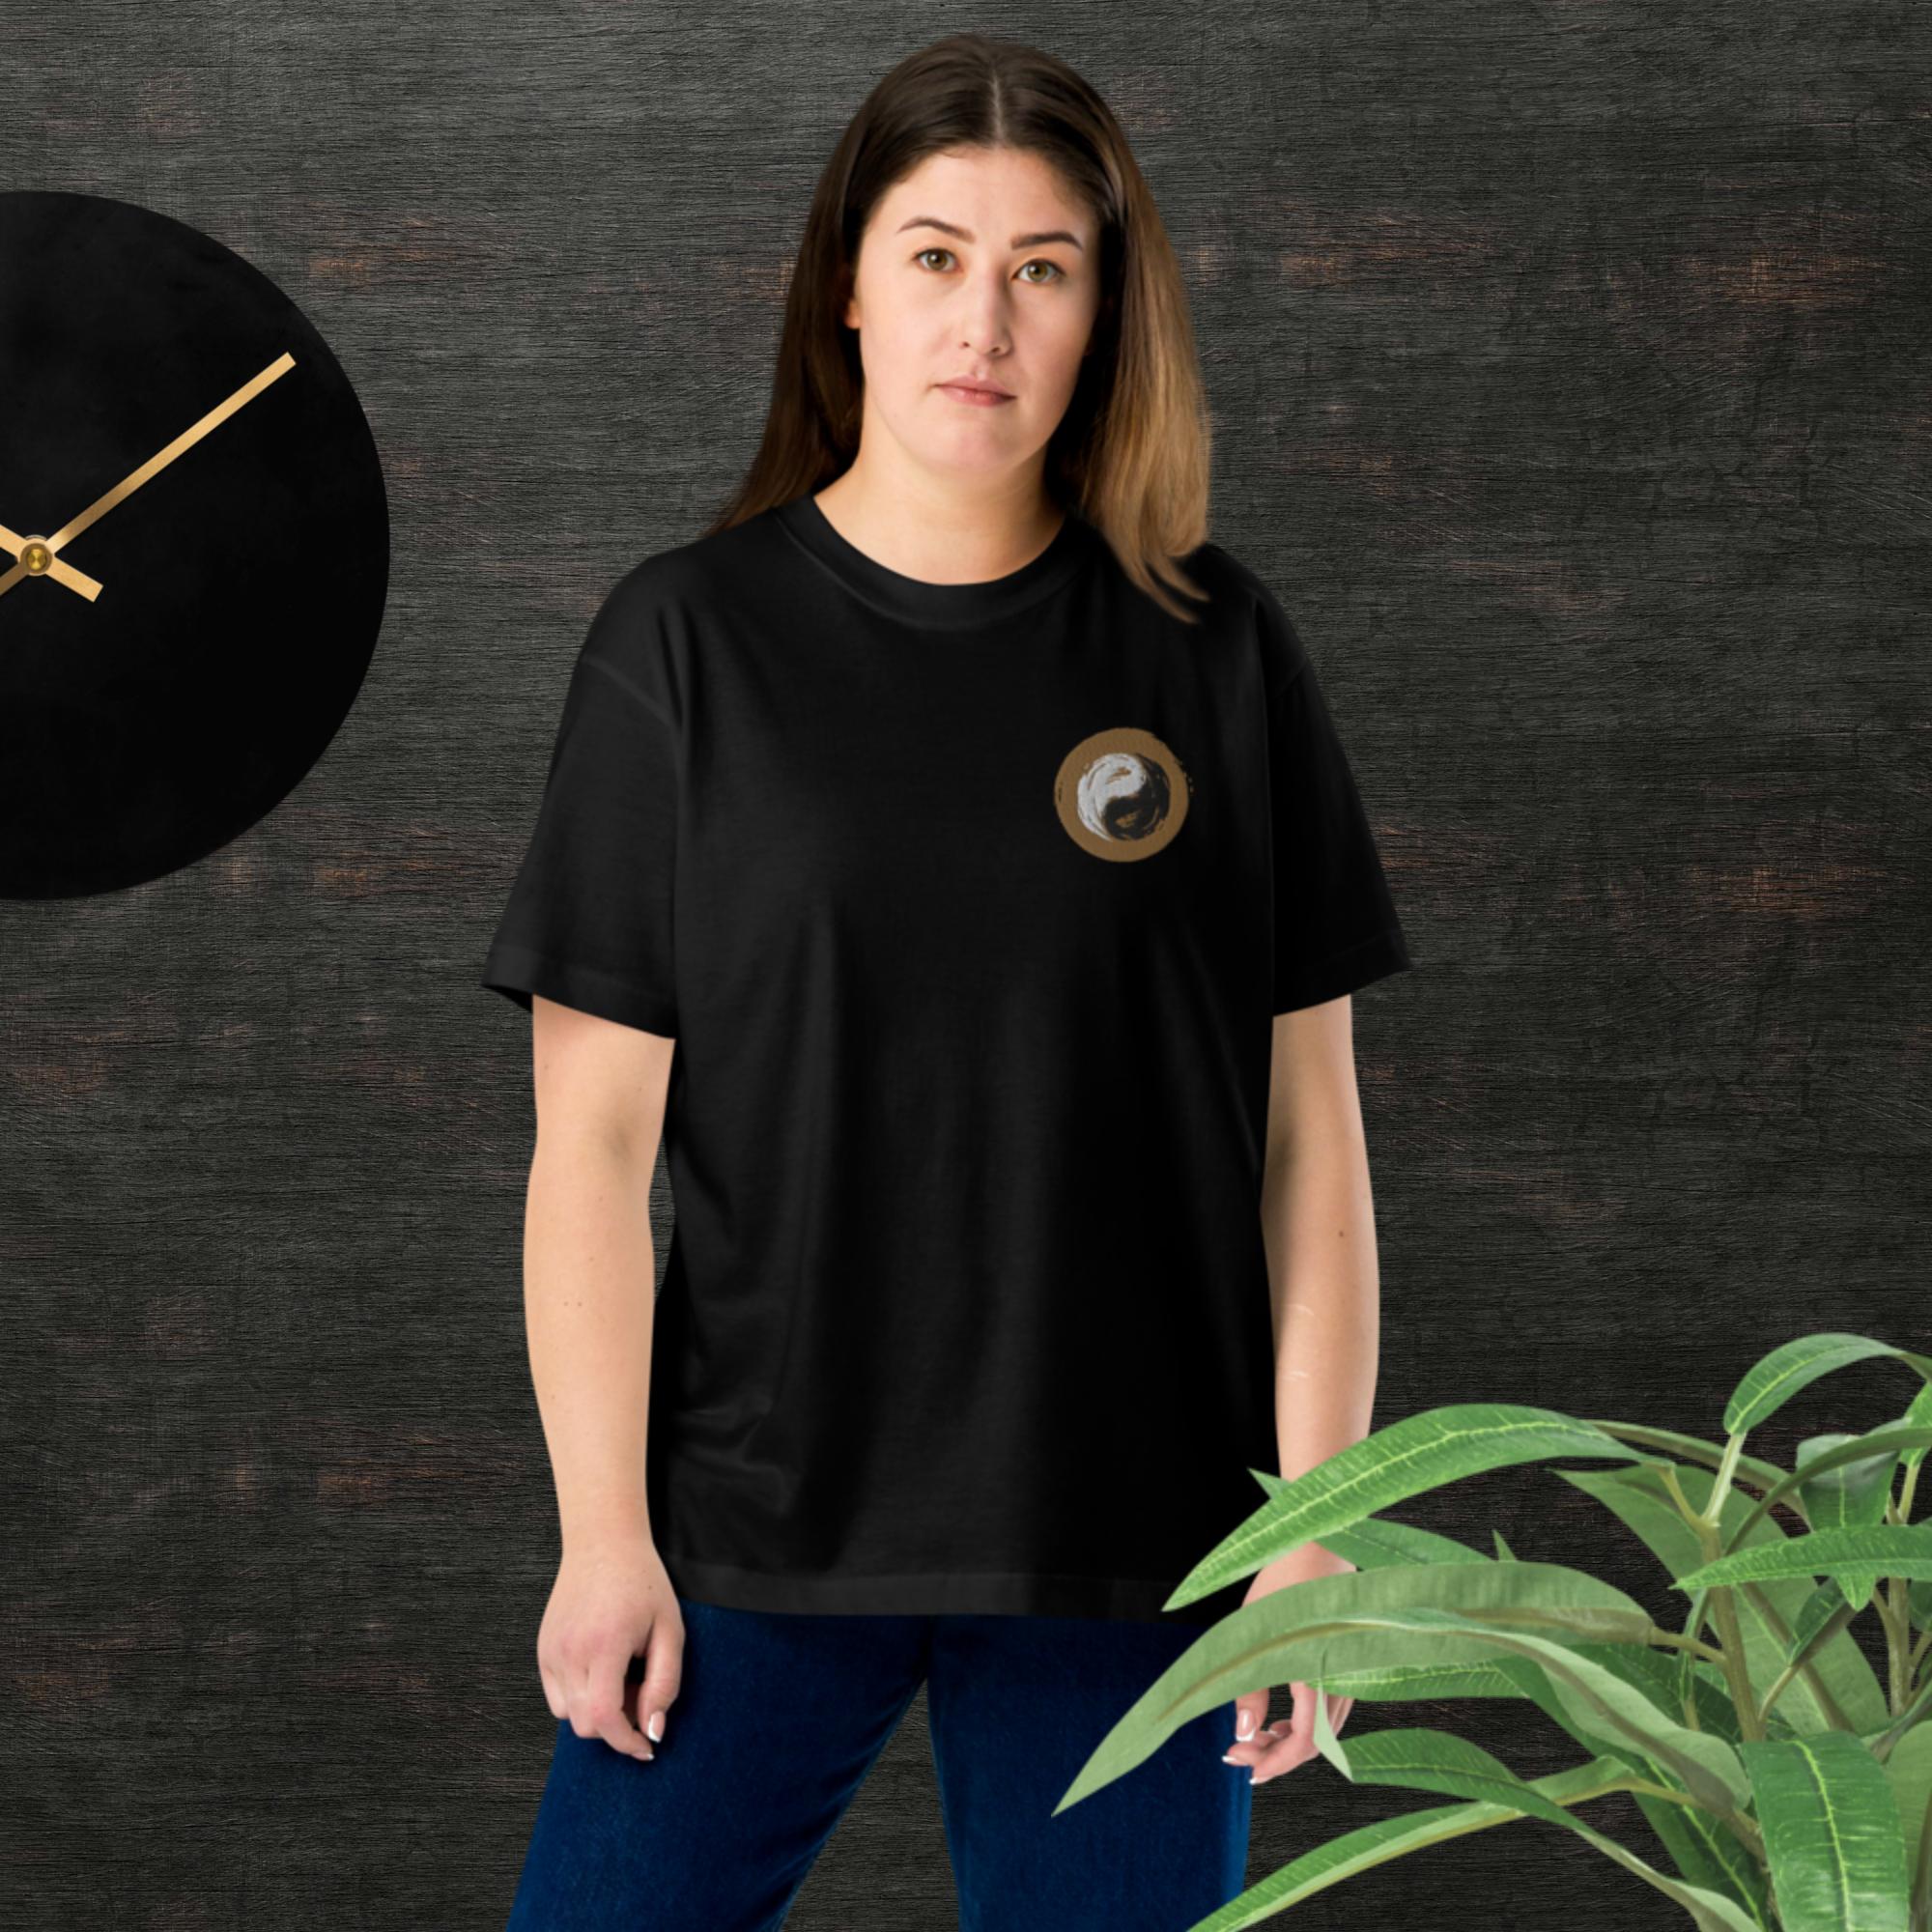 Unisex lightweight cotton yoga t-shirt - Personal Hour for Yoga and Meditations 